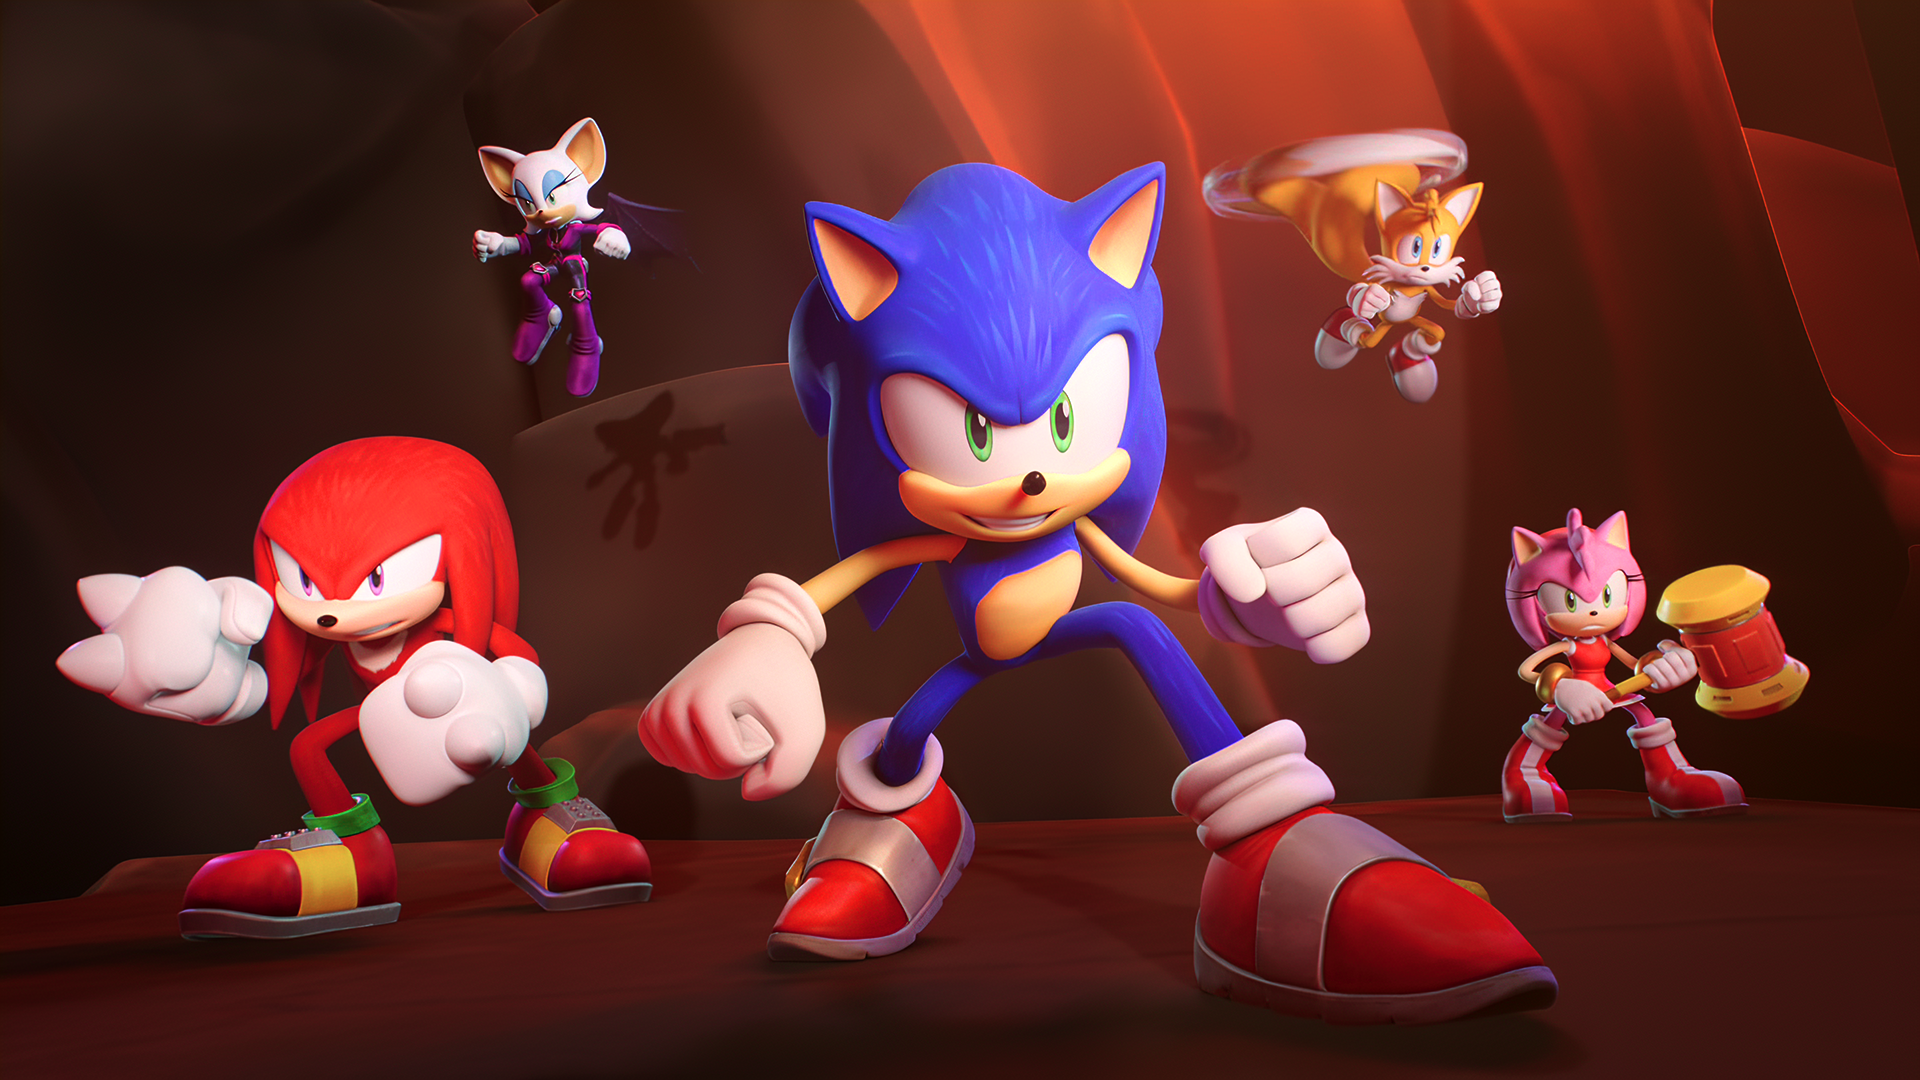 Sonic Prime - Tails Nine #02 by SonicBoomGirl23 on DeviantArt